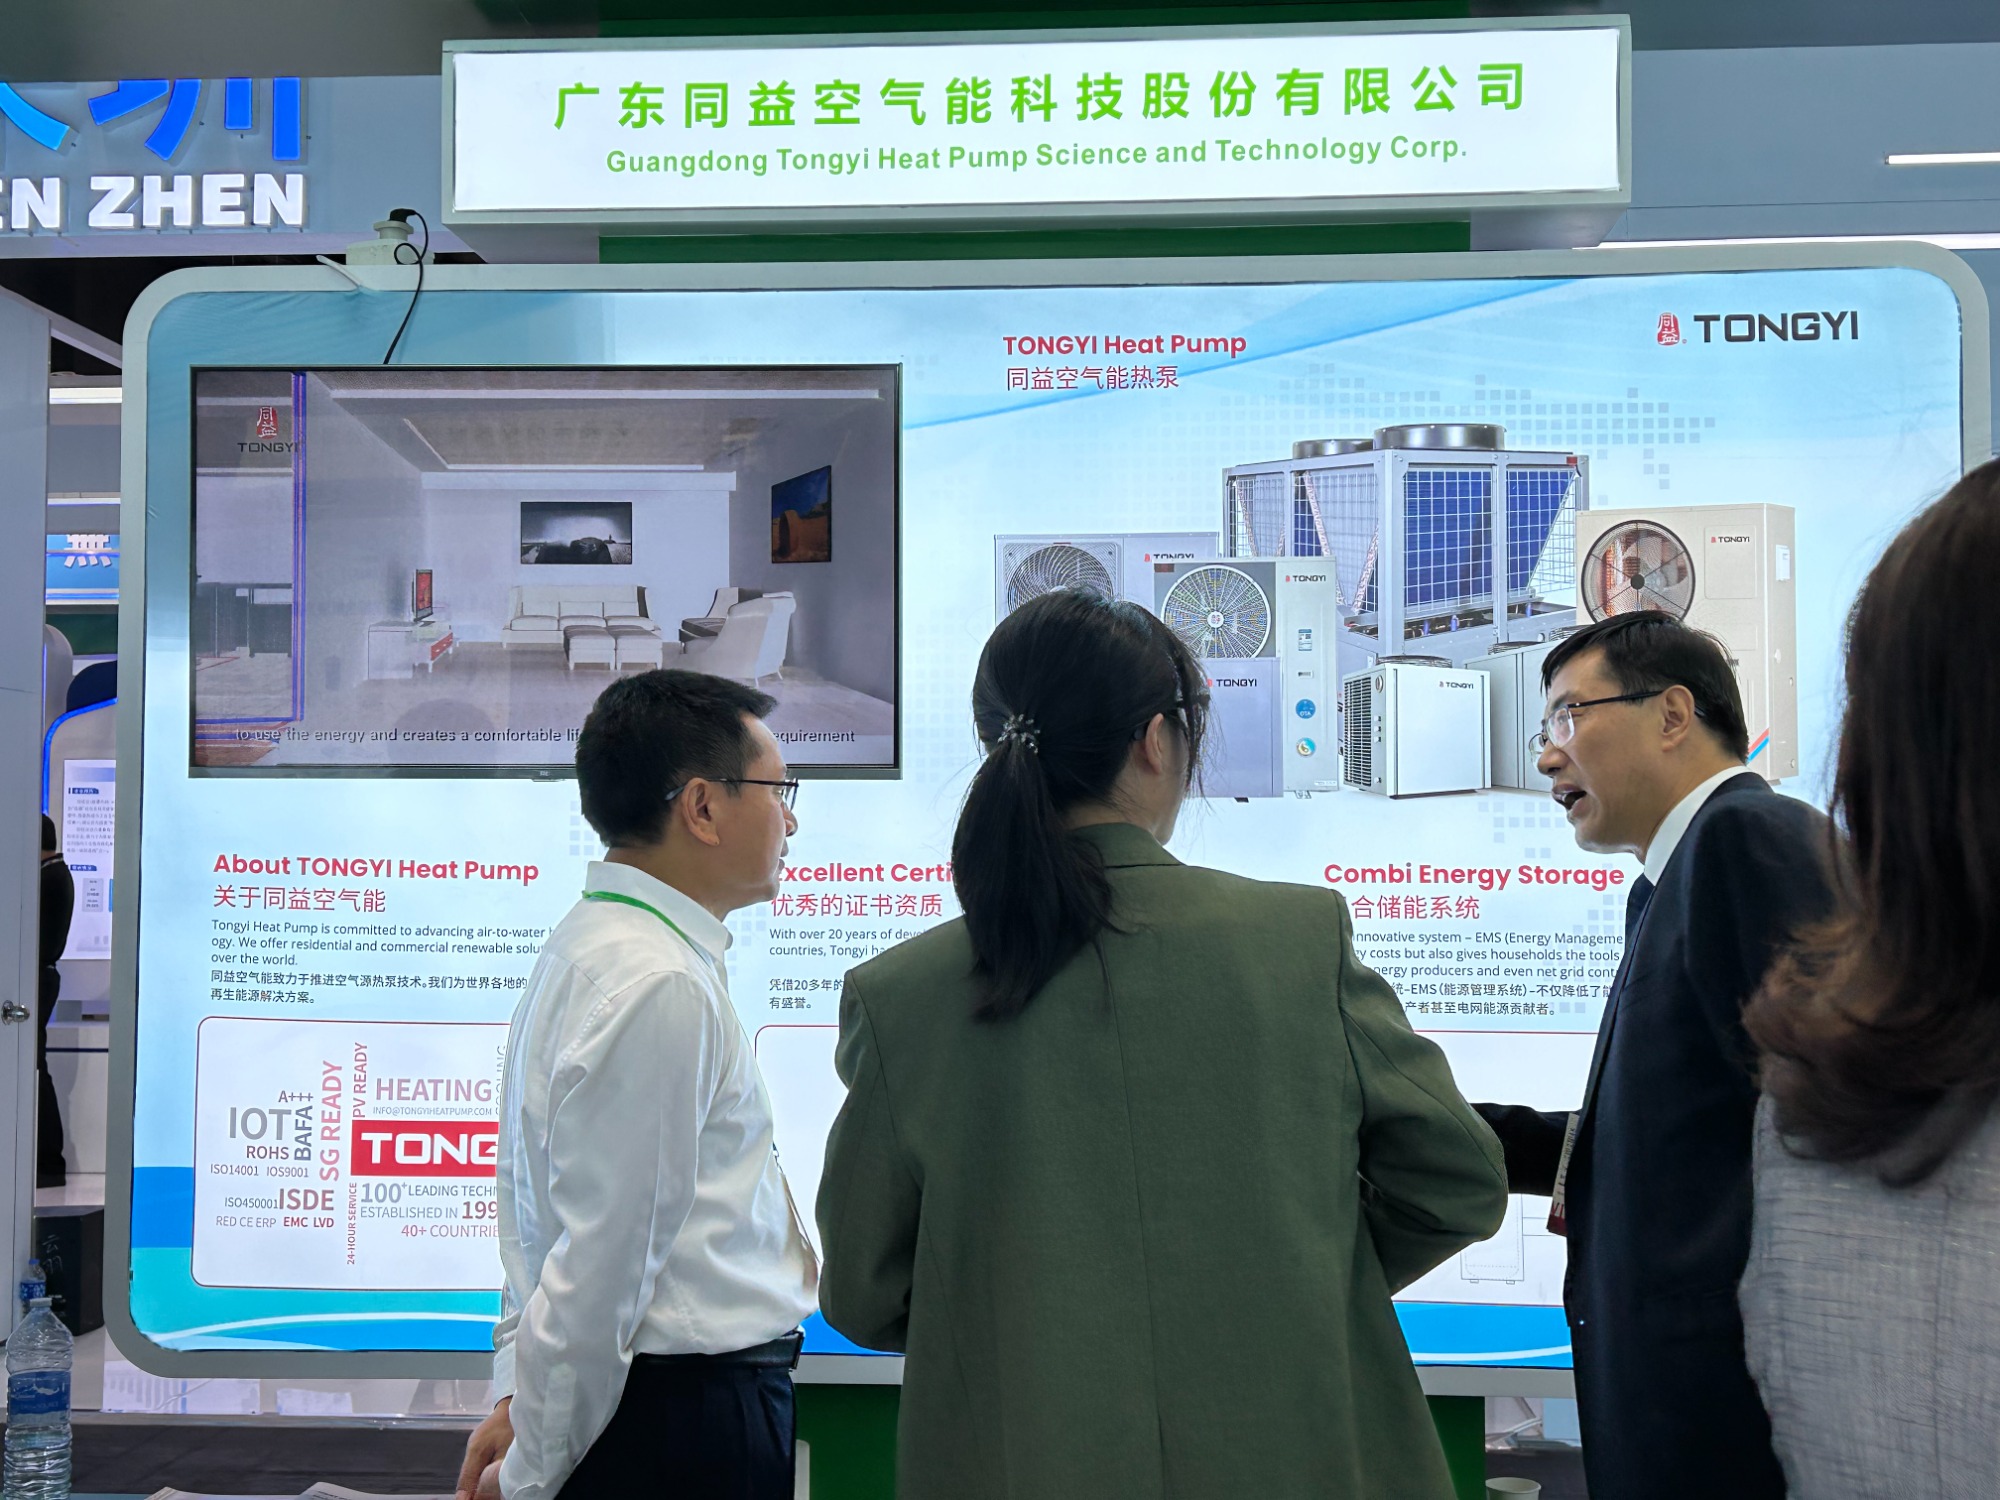 The International Environmental Protection Expo opens in Hong Kong, and Tongyi shines with its leading achievements in air source heat pump technology